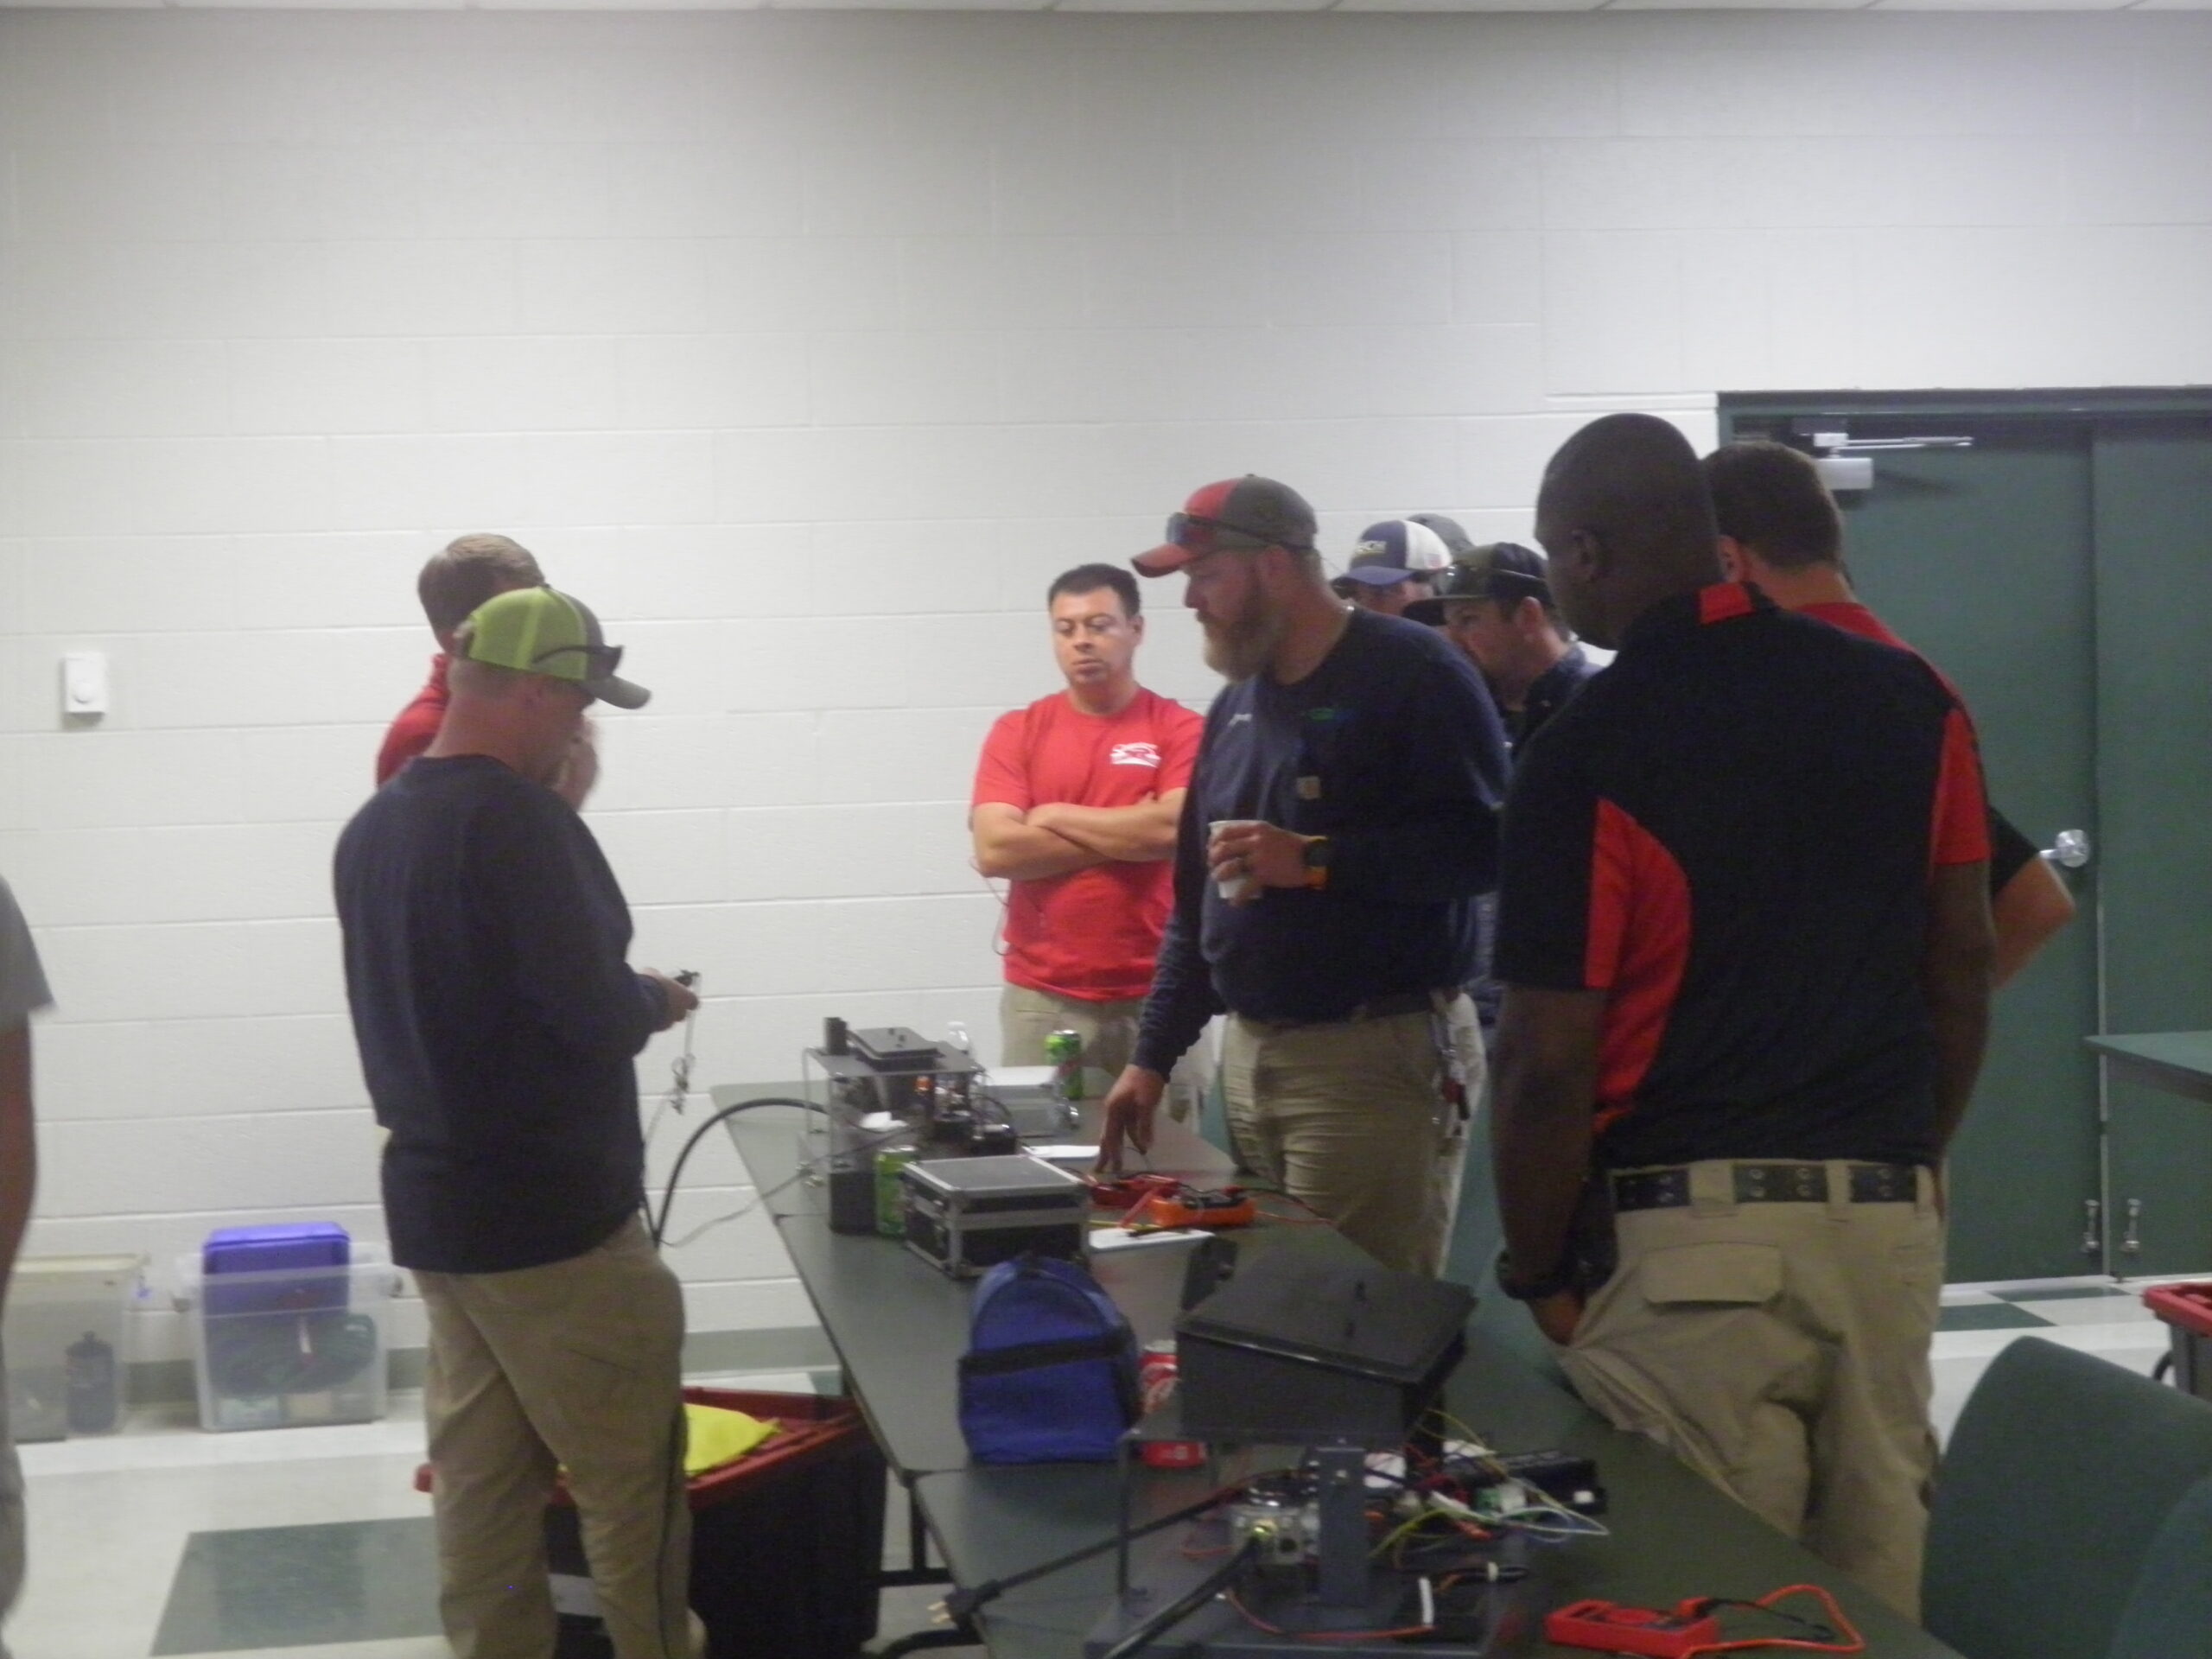 Intermediate Electronic Ignition, Hands On Spring Training Event - Dickson, TN; June 14, 2023